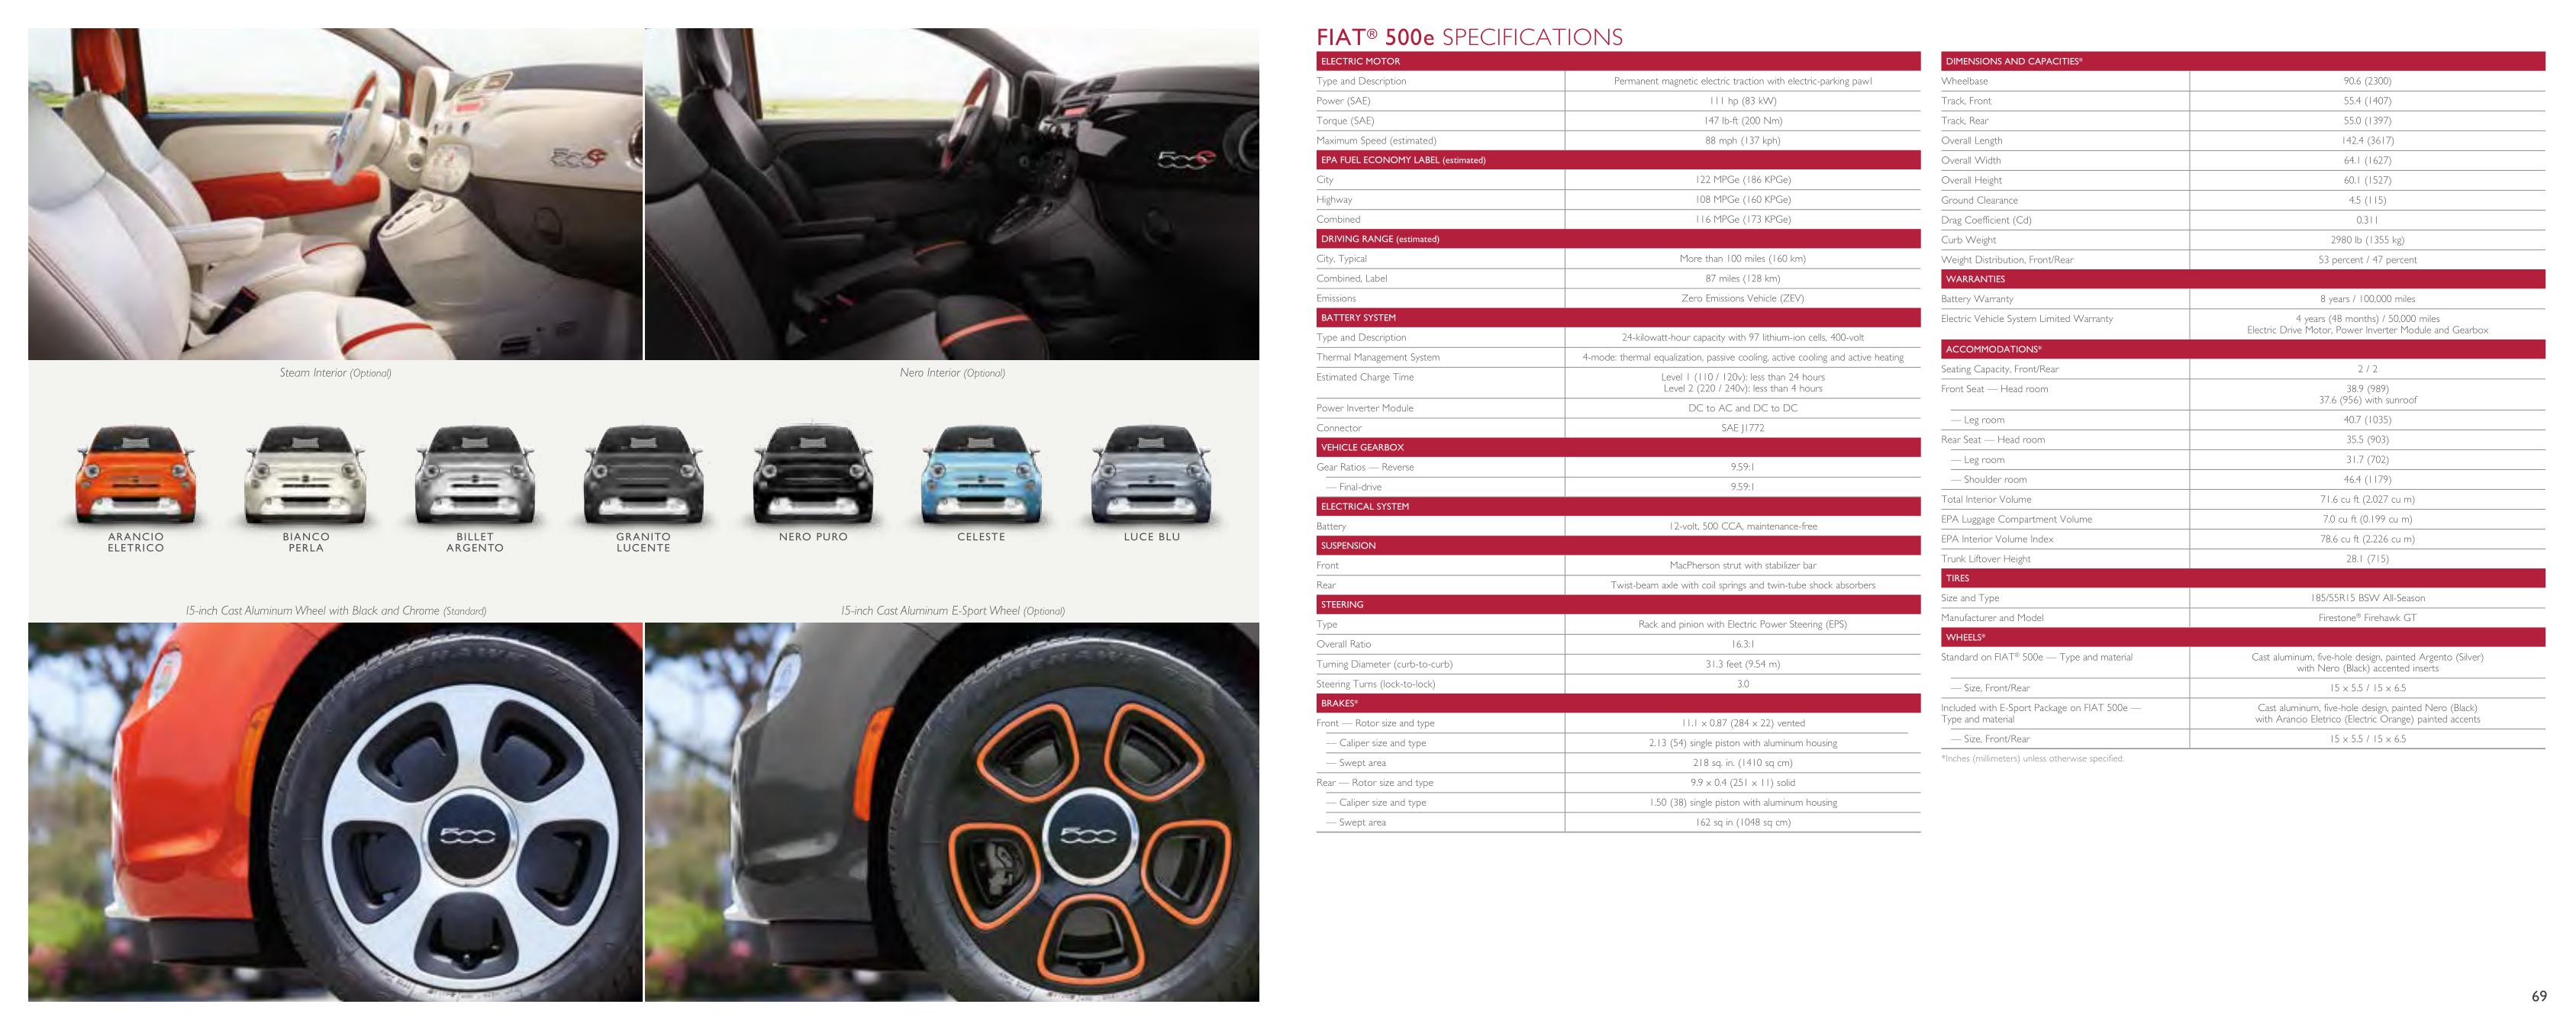 2015 Fiat 500 Brochure Page 8